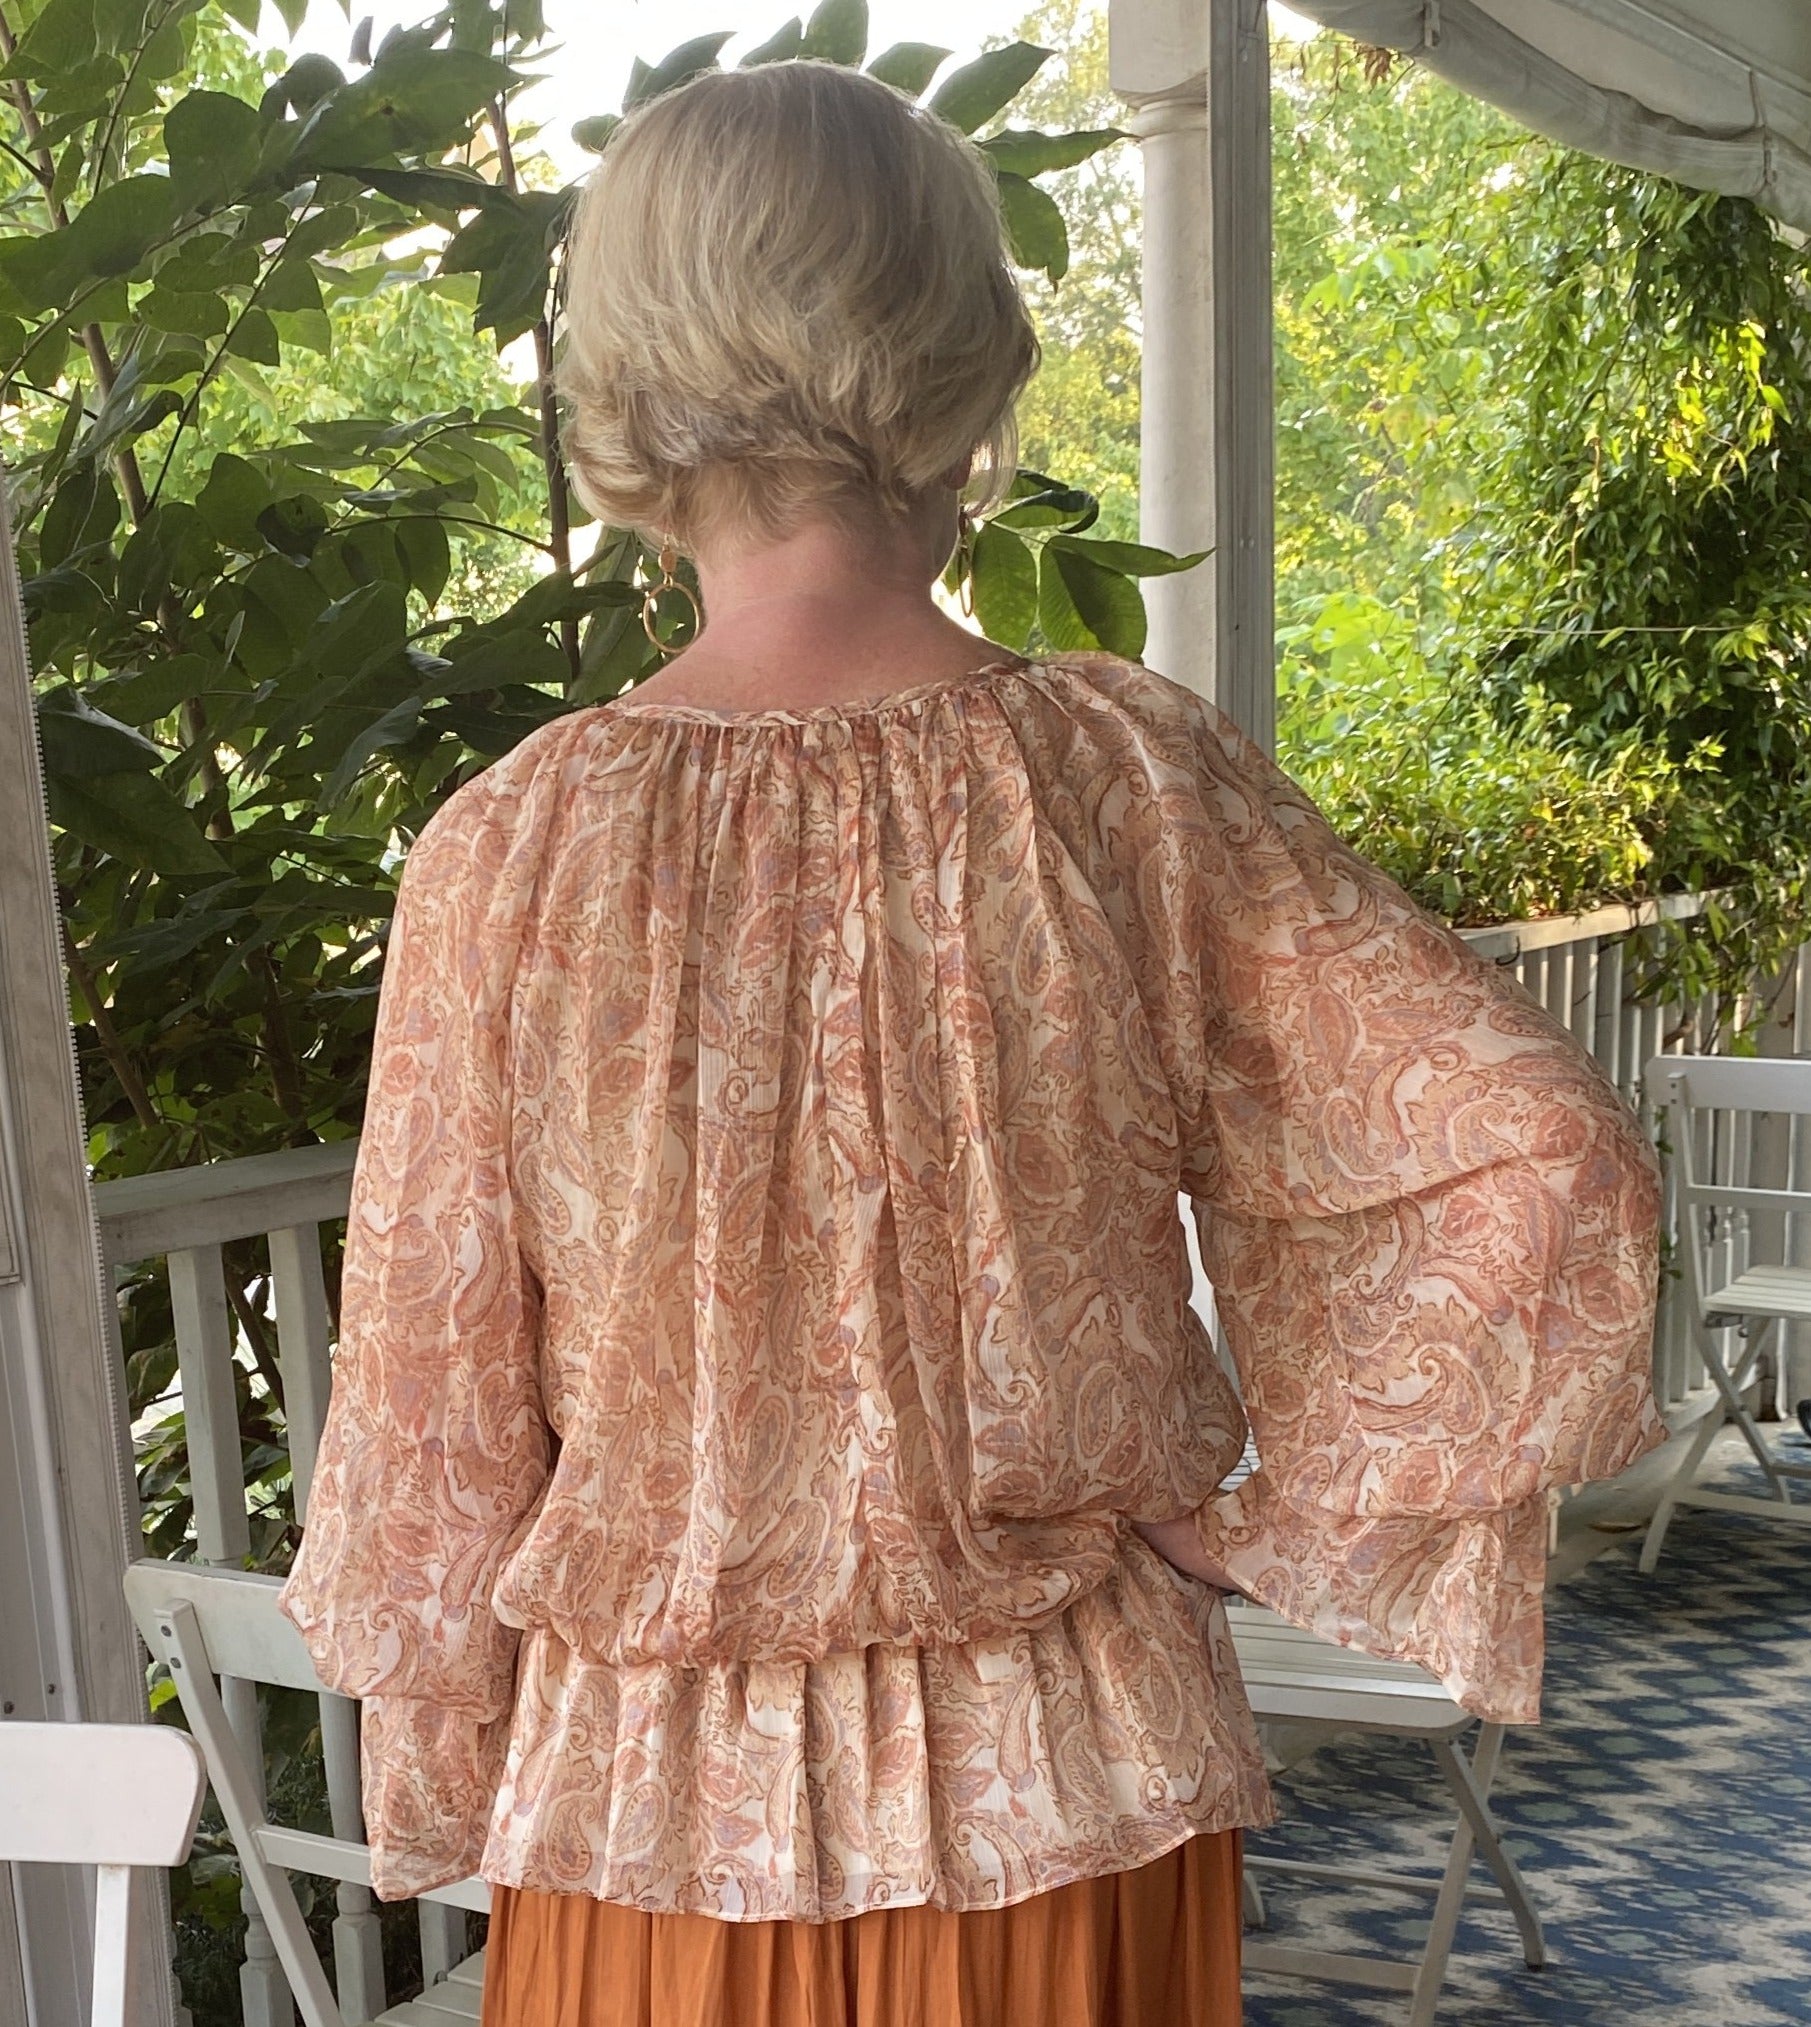 Back view of this lovely chiffon blouse with elastic waste and wrist